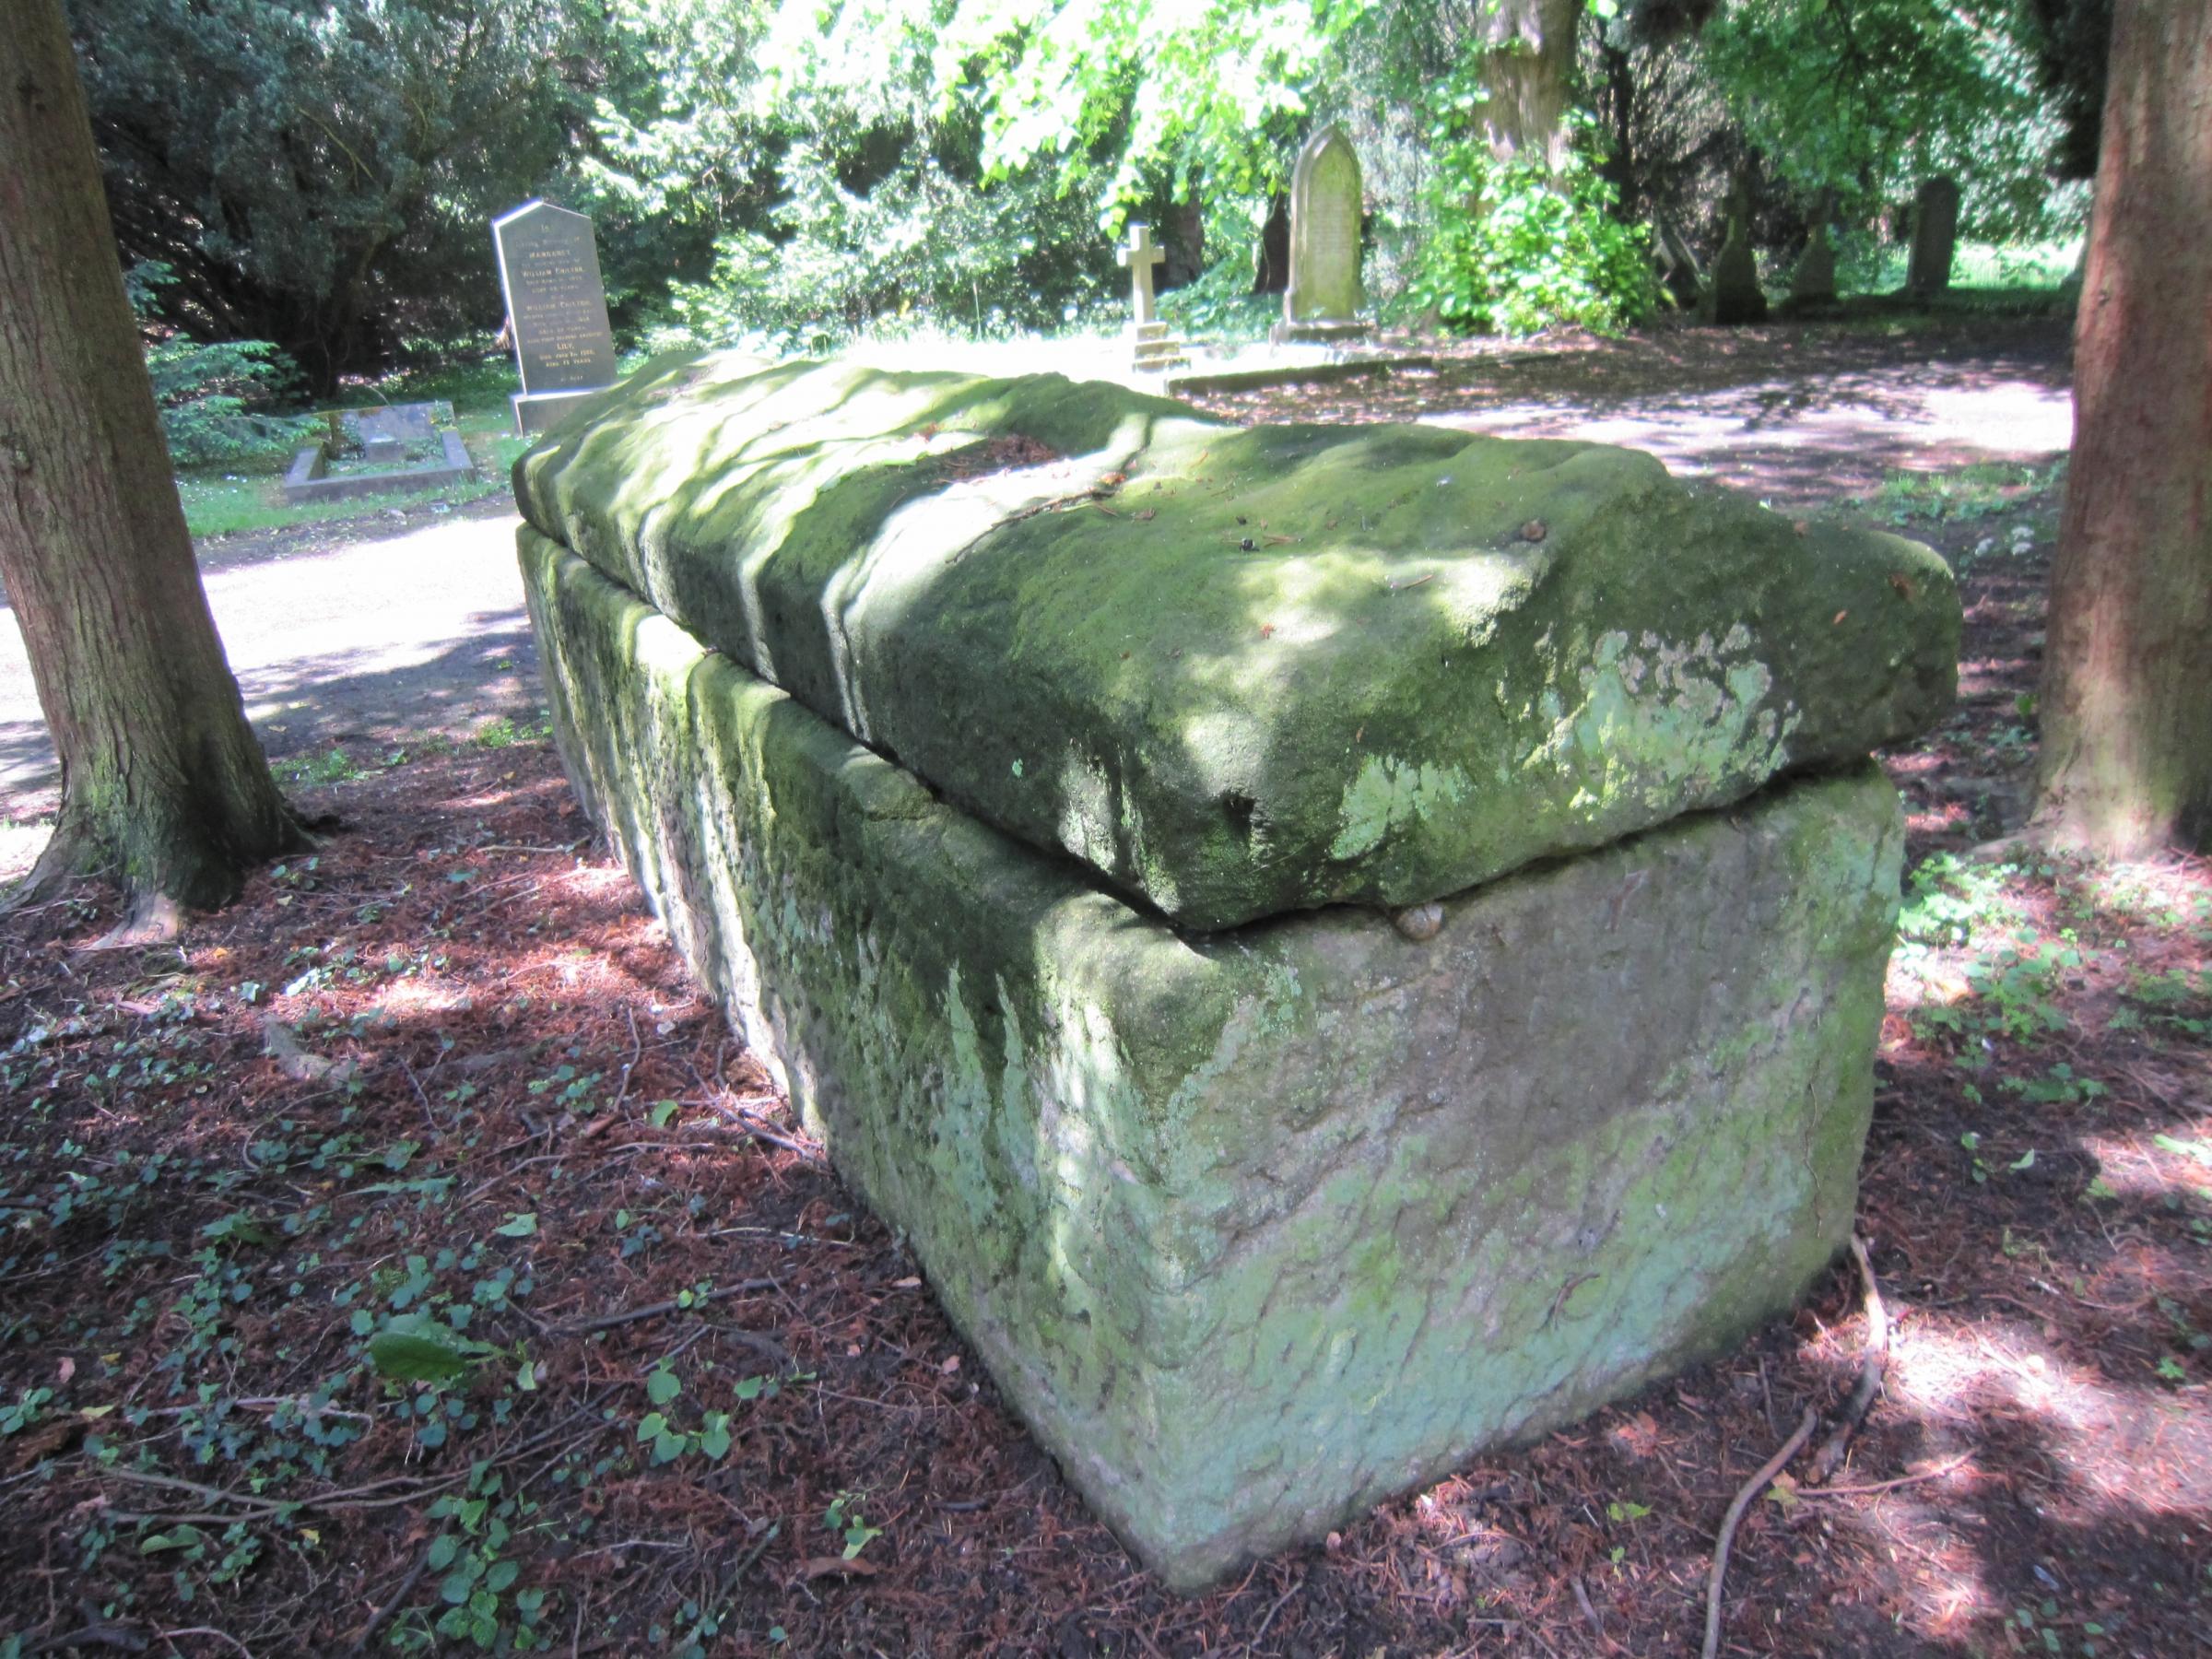 A Roman sarcophagus in Darlingtons West Cemetery - it is said to have come from Castle Hills, Northallerton, when the mainline was built in 1838